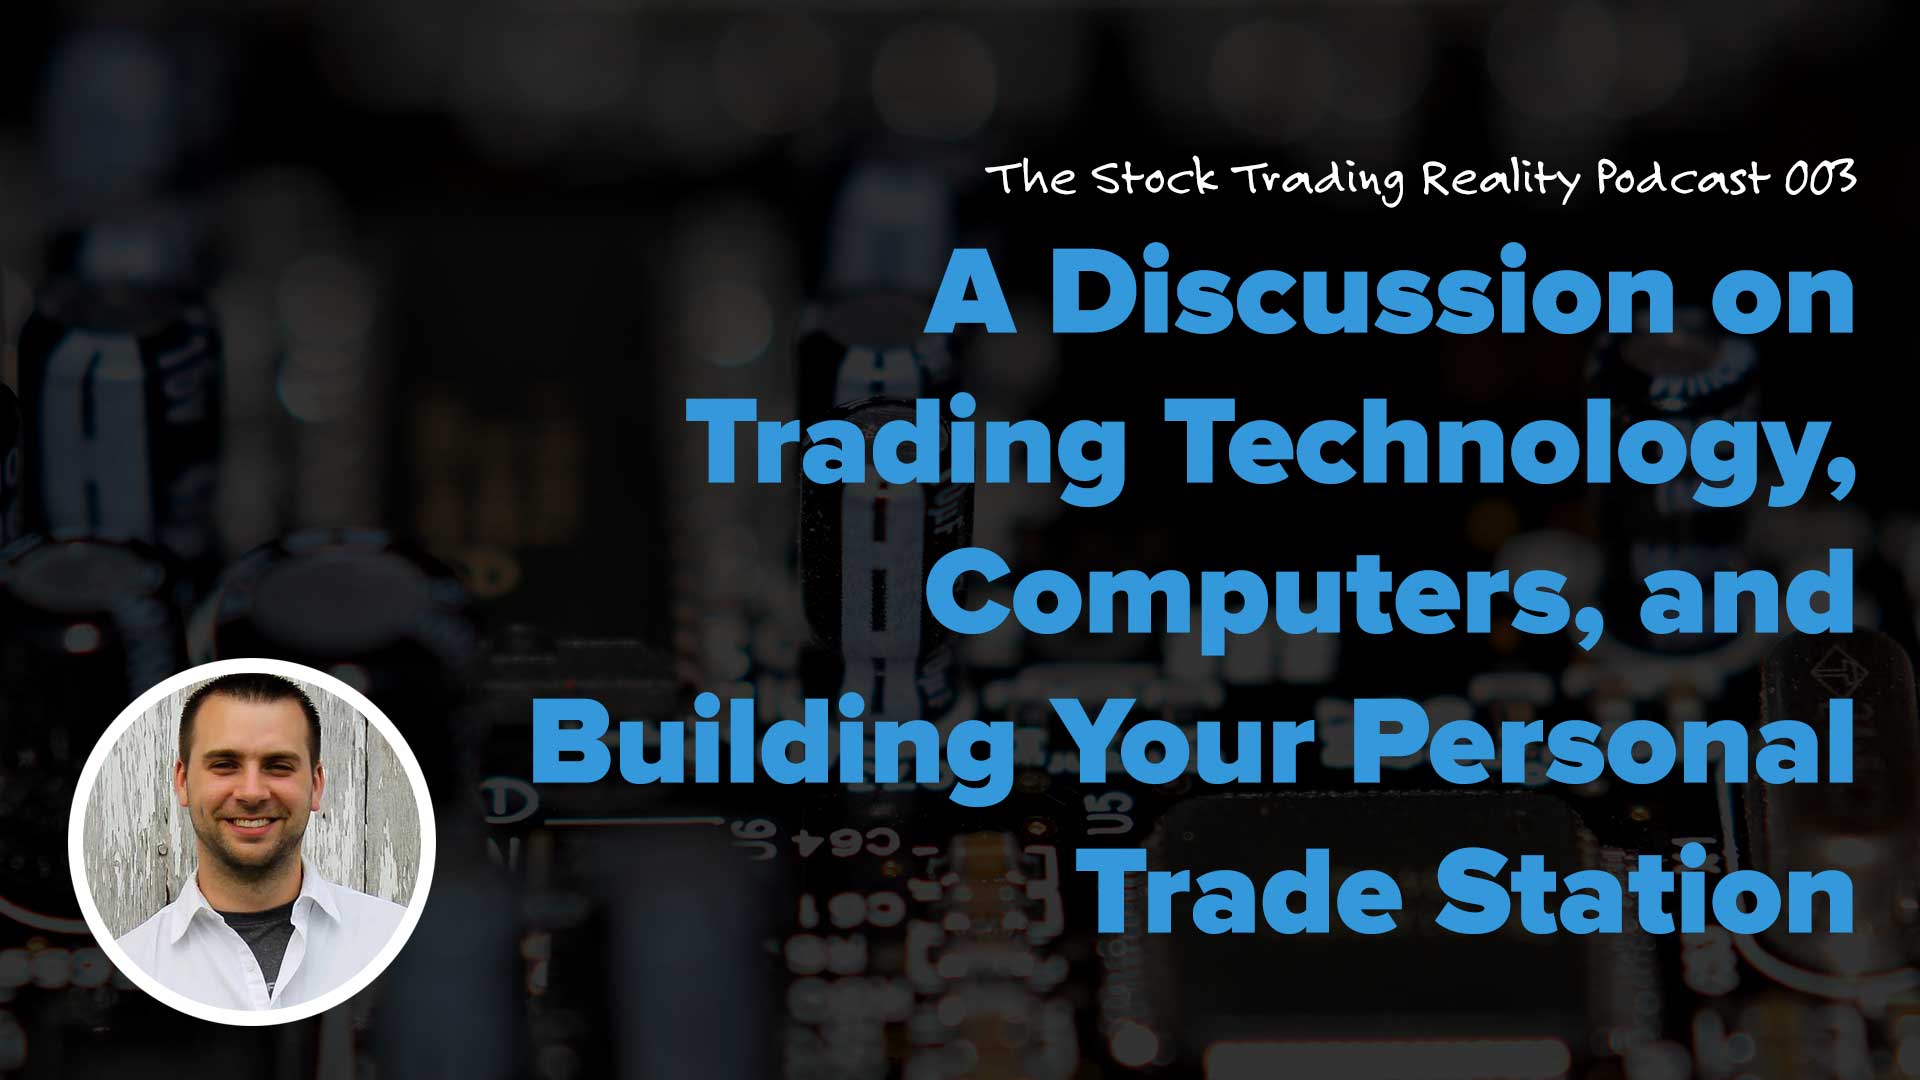 STR 003: A Discussion on Trading Technology, Computers, and Building Your Personal Trade Station